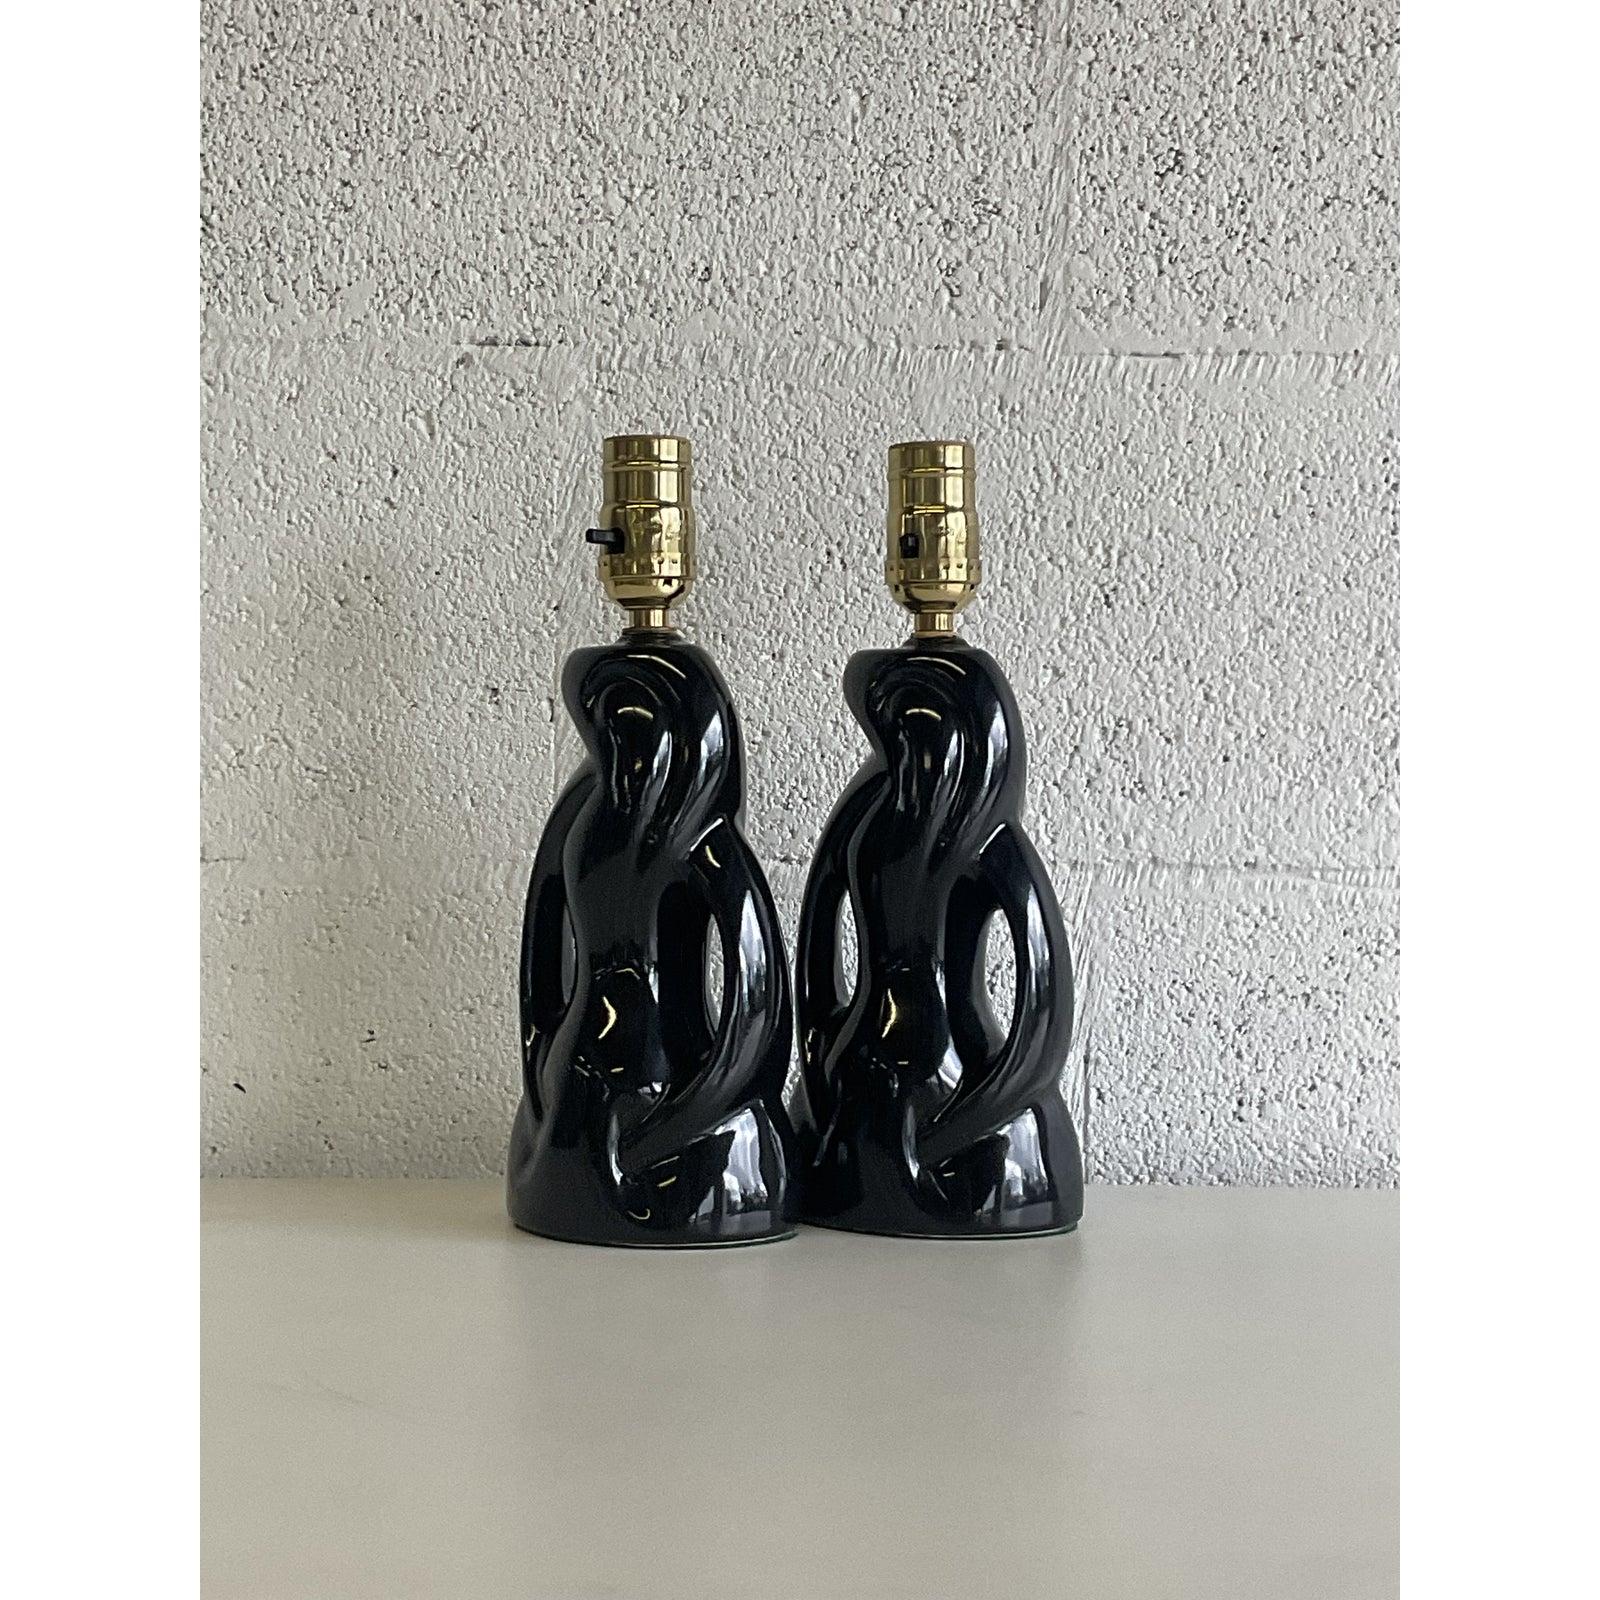 Midcentury Abstract Black Glazed Ceramic Boudoir Lamps - A Pair For Sale 2